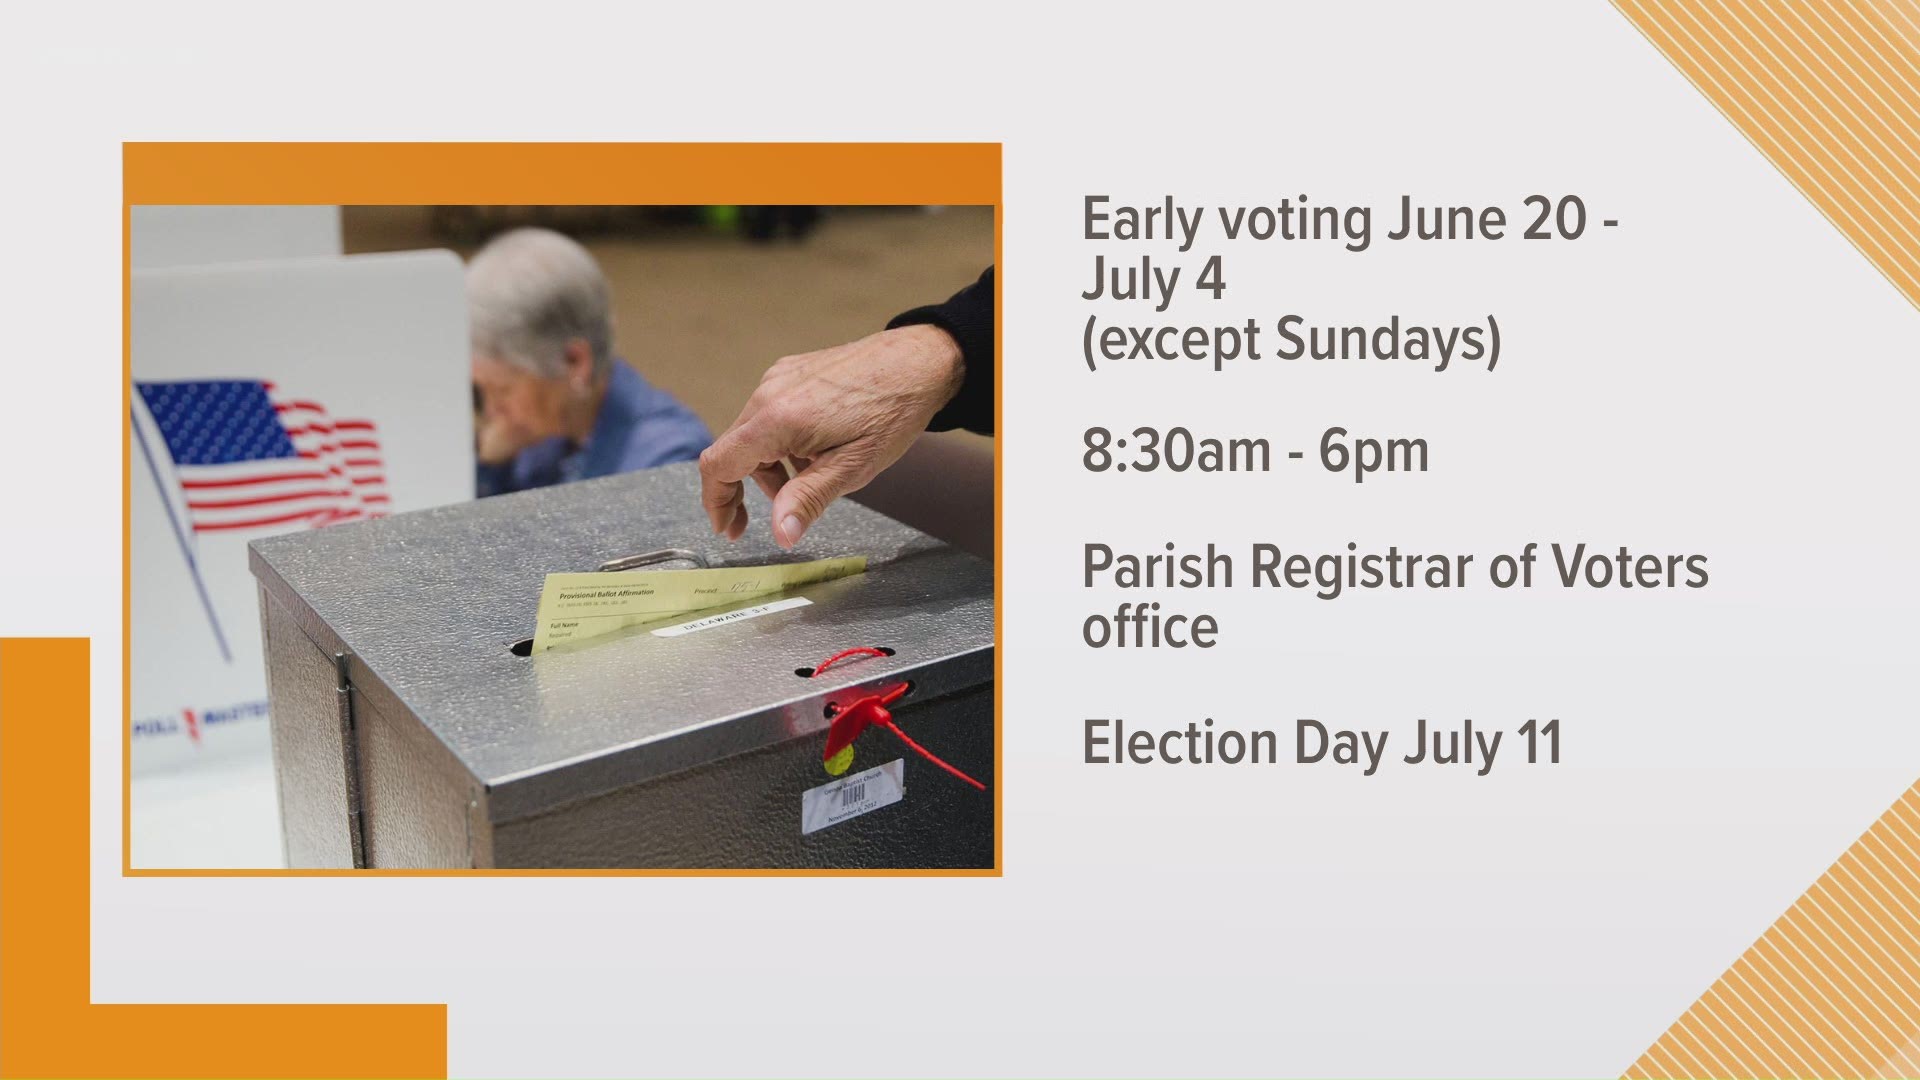 Several races other than the presidential primary are also on the ballot. Early voting lasts from June 20 - July 4. Then, Election Day is July 11.